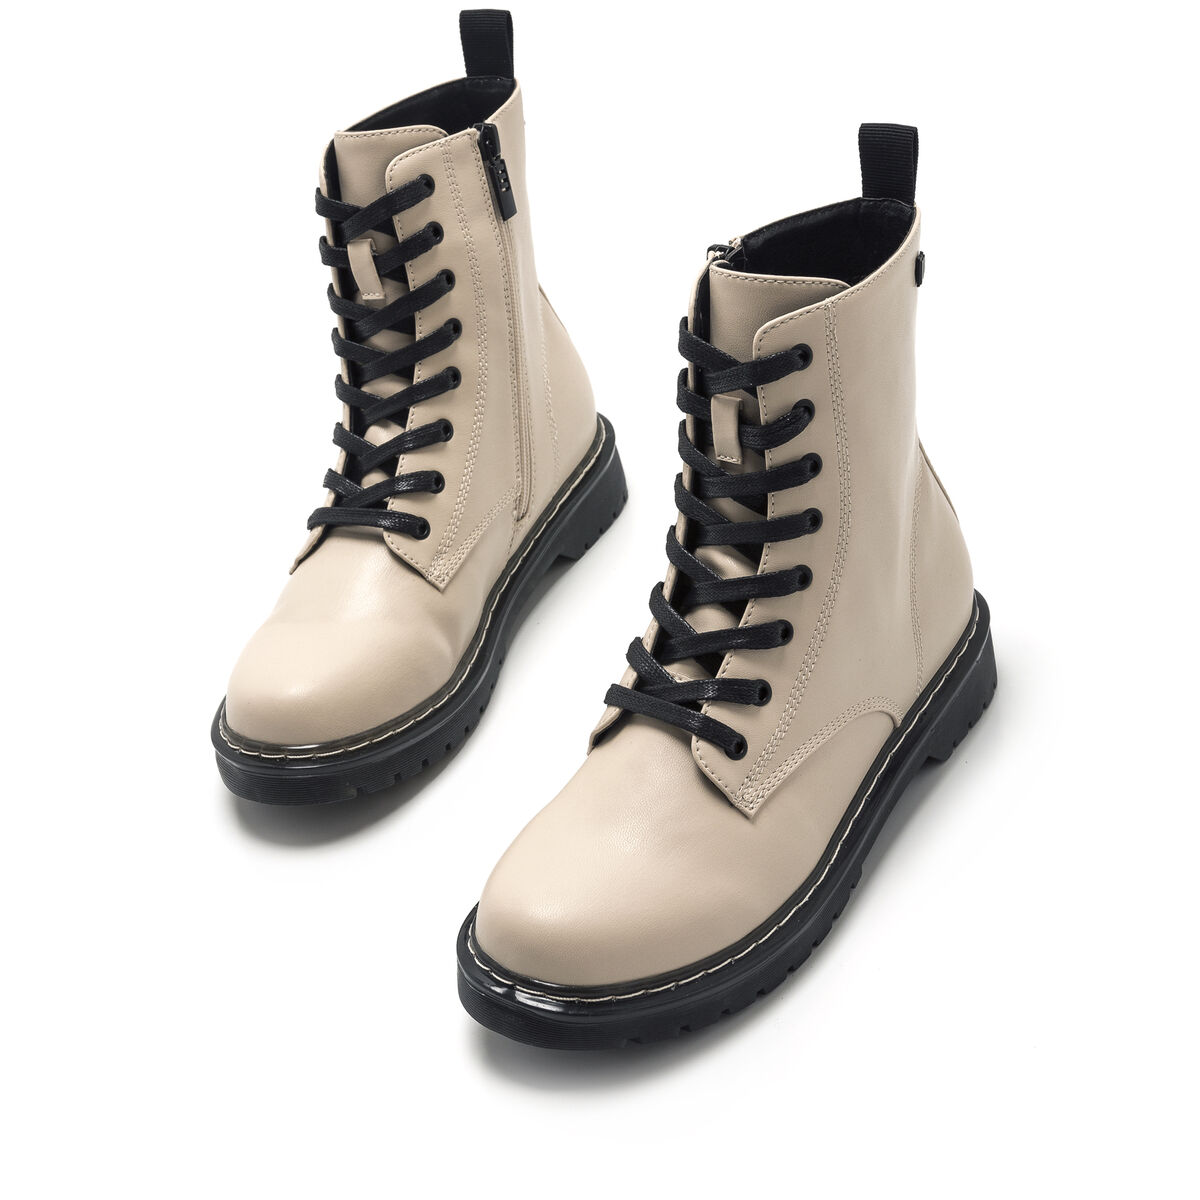 Botines planos Mujer STORM beige 55338 c51976 MTNG 03